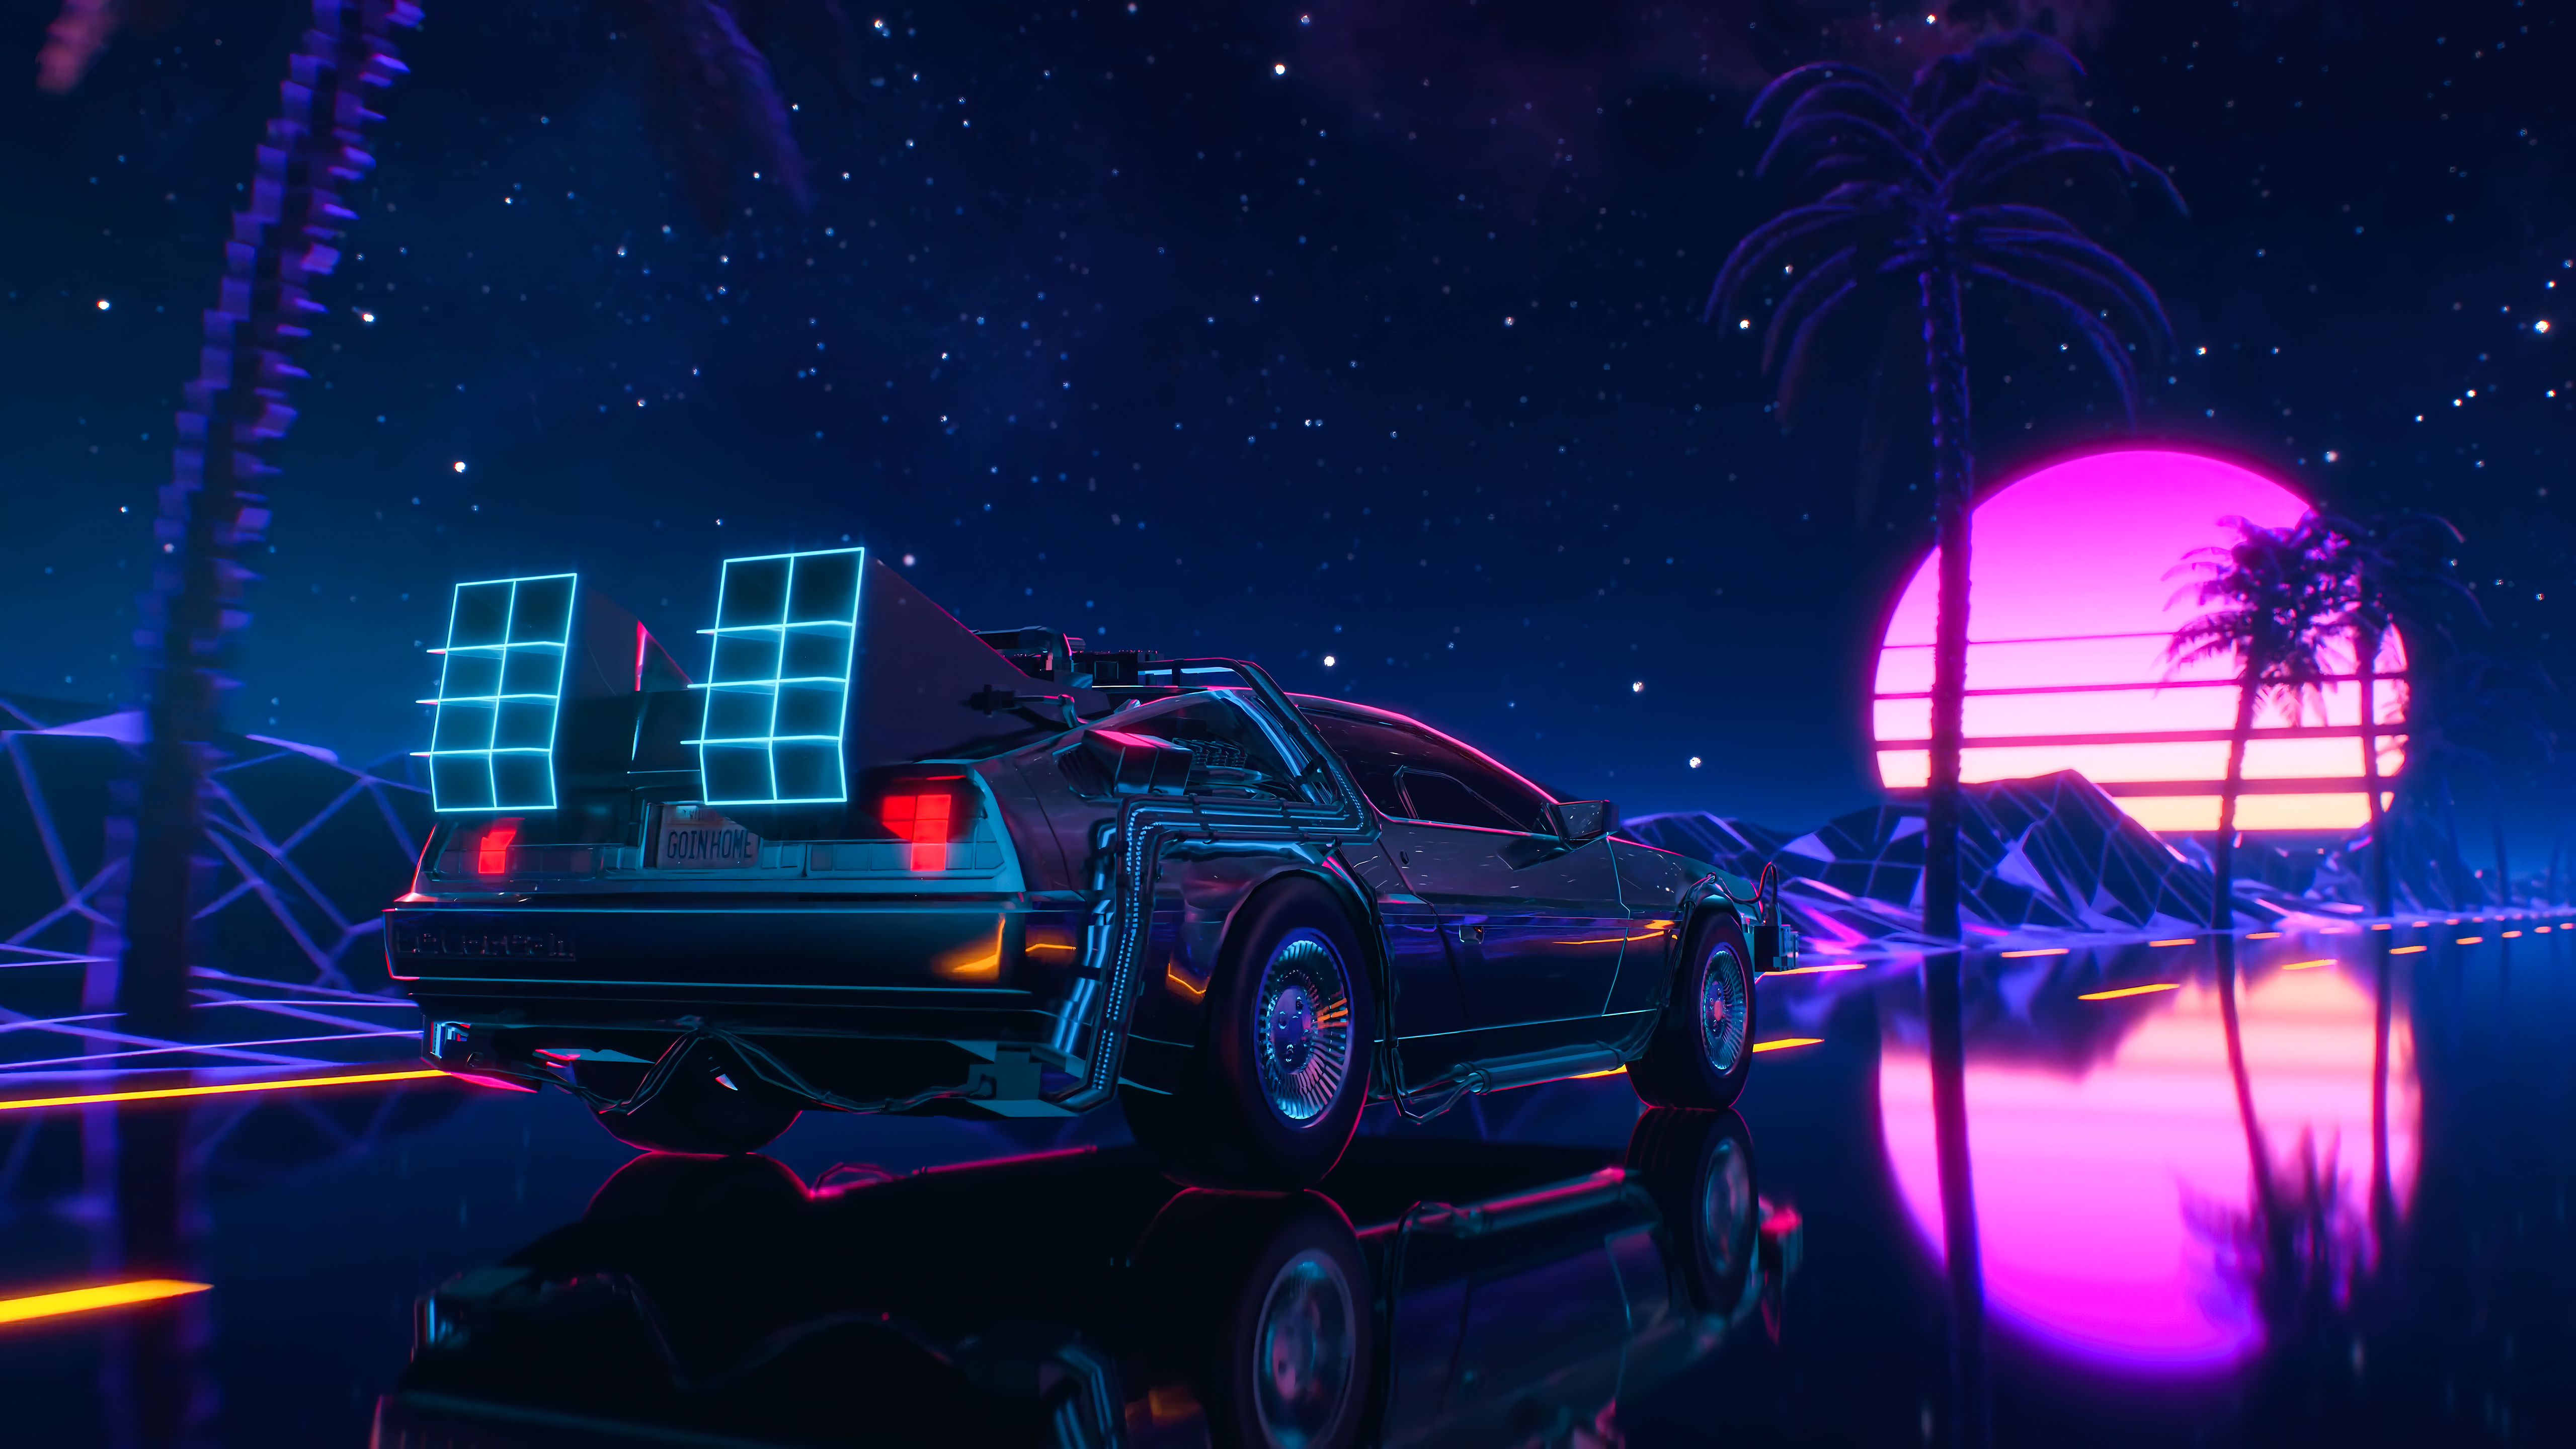 DeLorean Back To The Future Ambient Retrowave Synthwave Digital Art Palm Trees Stars Reflection Tail 5120x2880